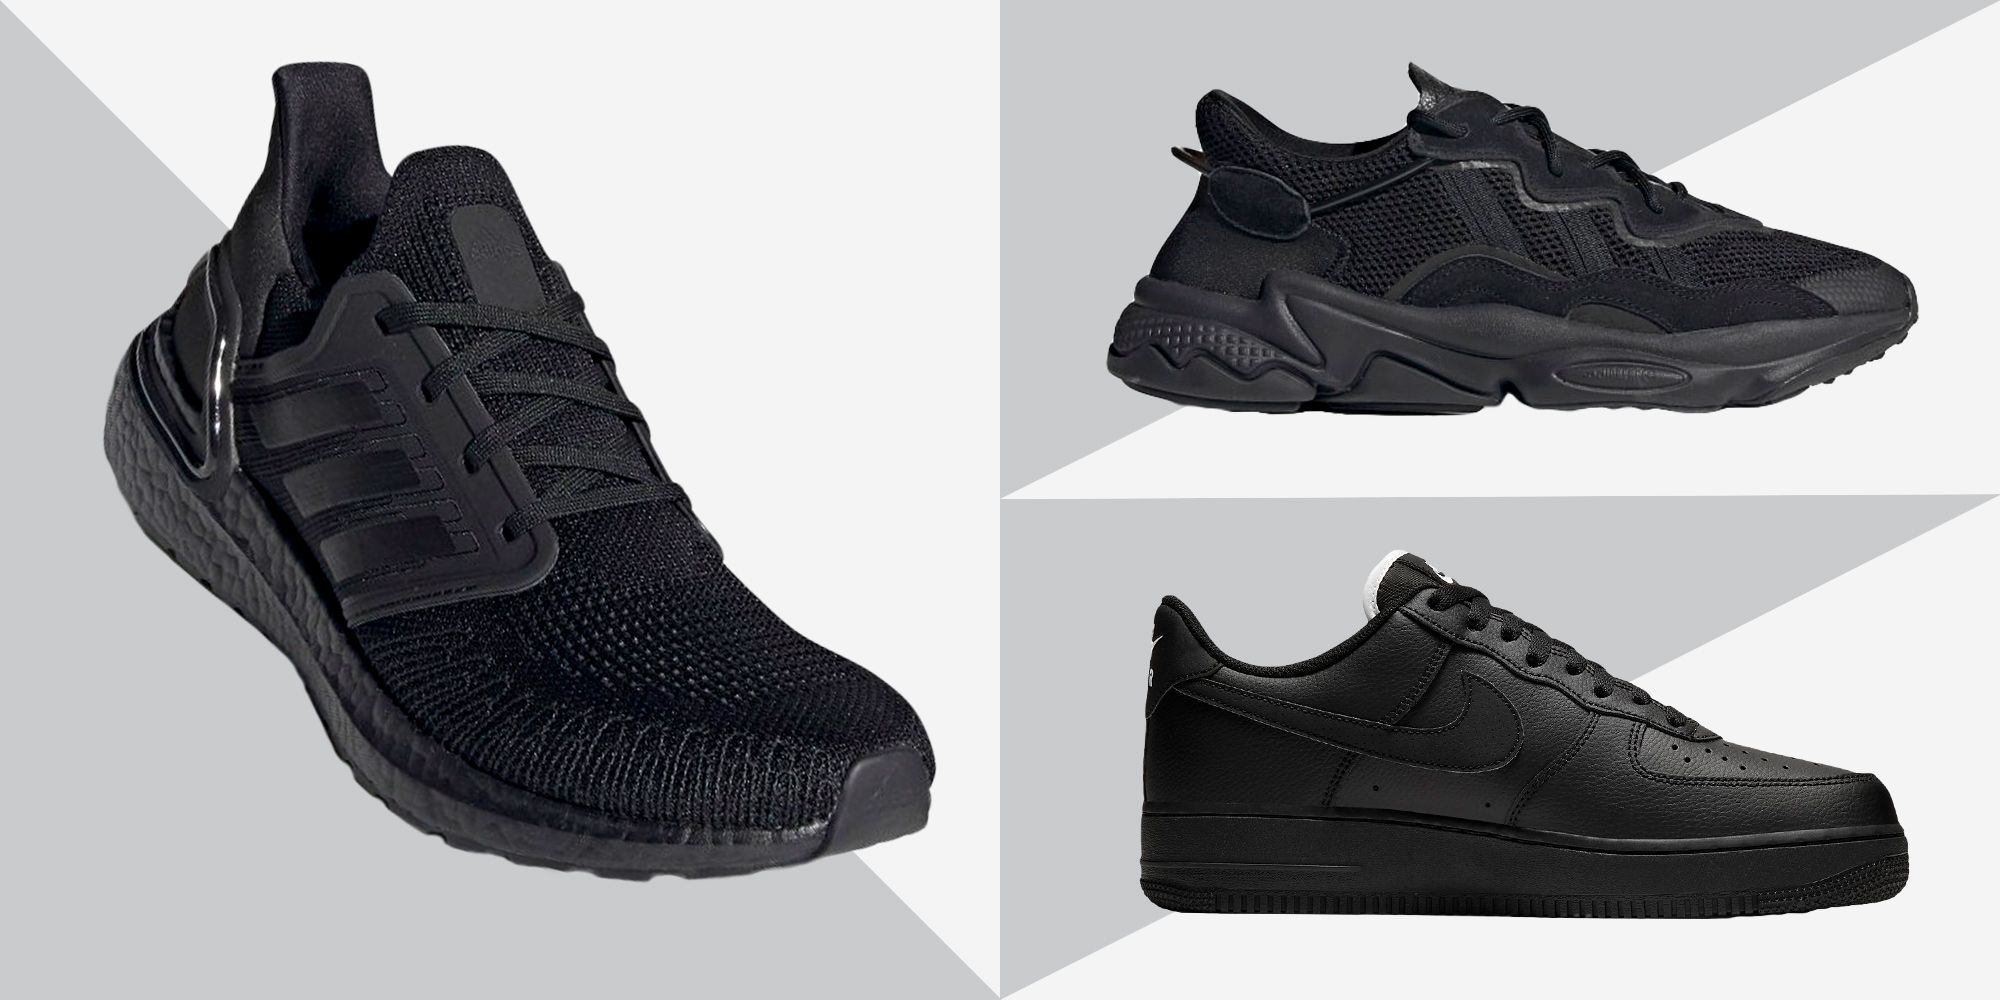 13 Best All-Black Sneakers to Now - Stylish Shoes Men